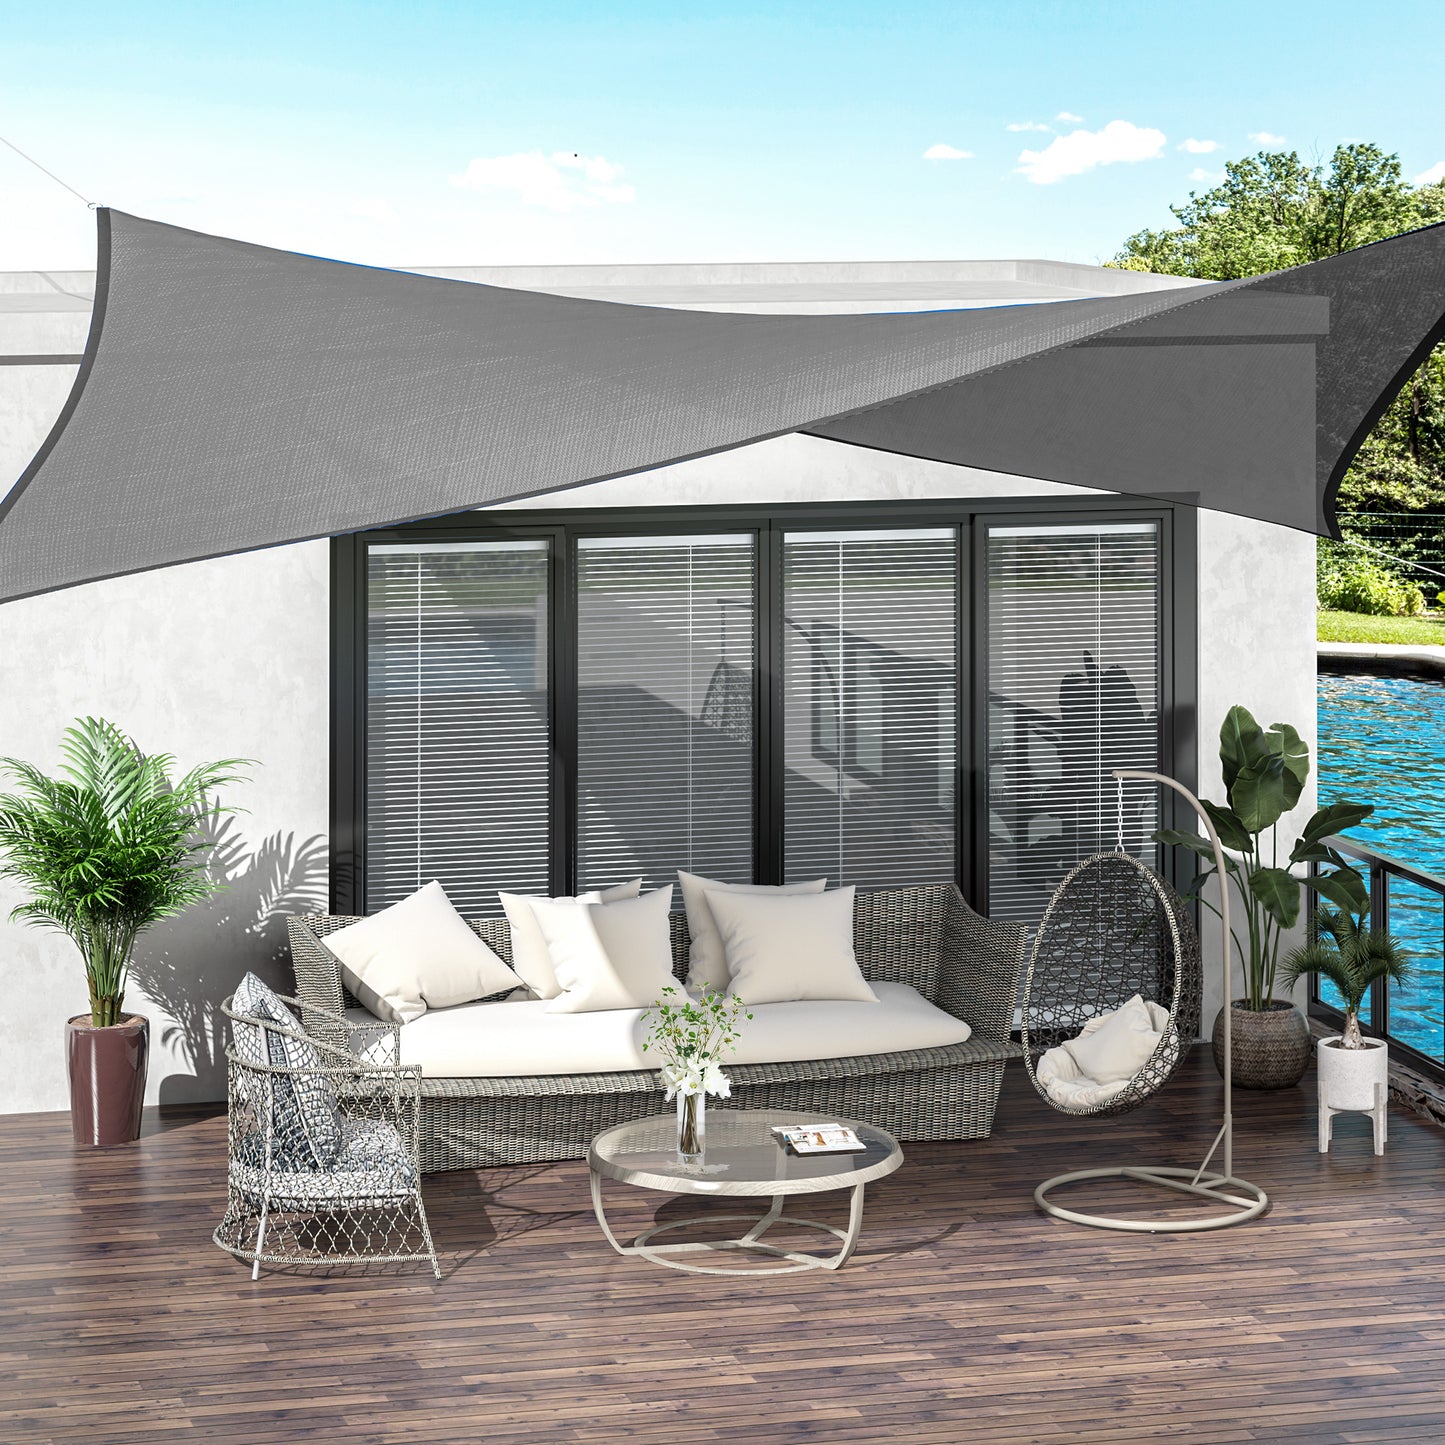 Outsunny 4 x 3m Sun Shade Sail Rectangle Canopy Outdoor Sunscreen Awning with Mounting Ropes for Garden, Patio, Party, UV Protection, Charcoal Grey